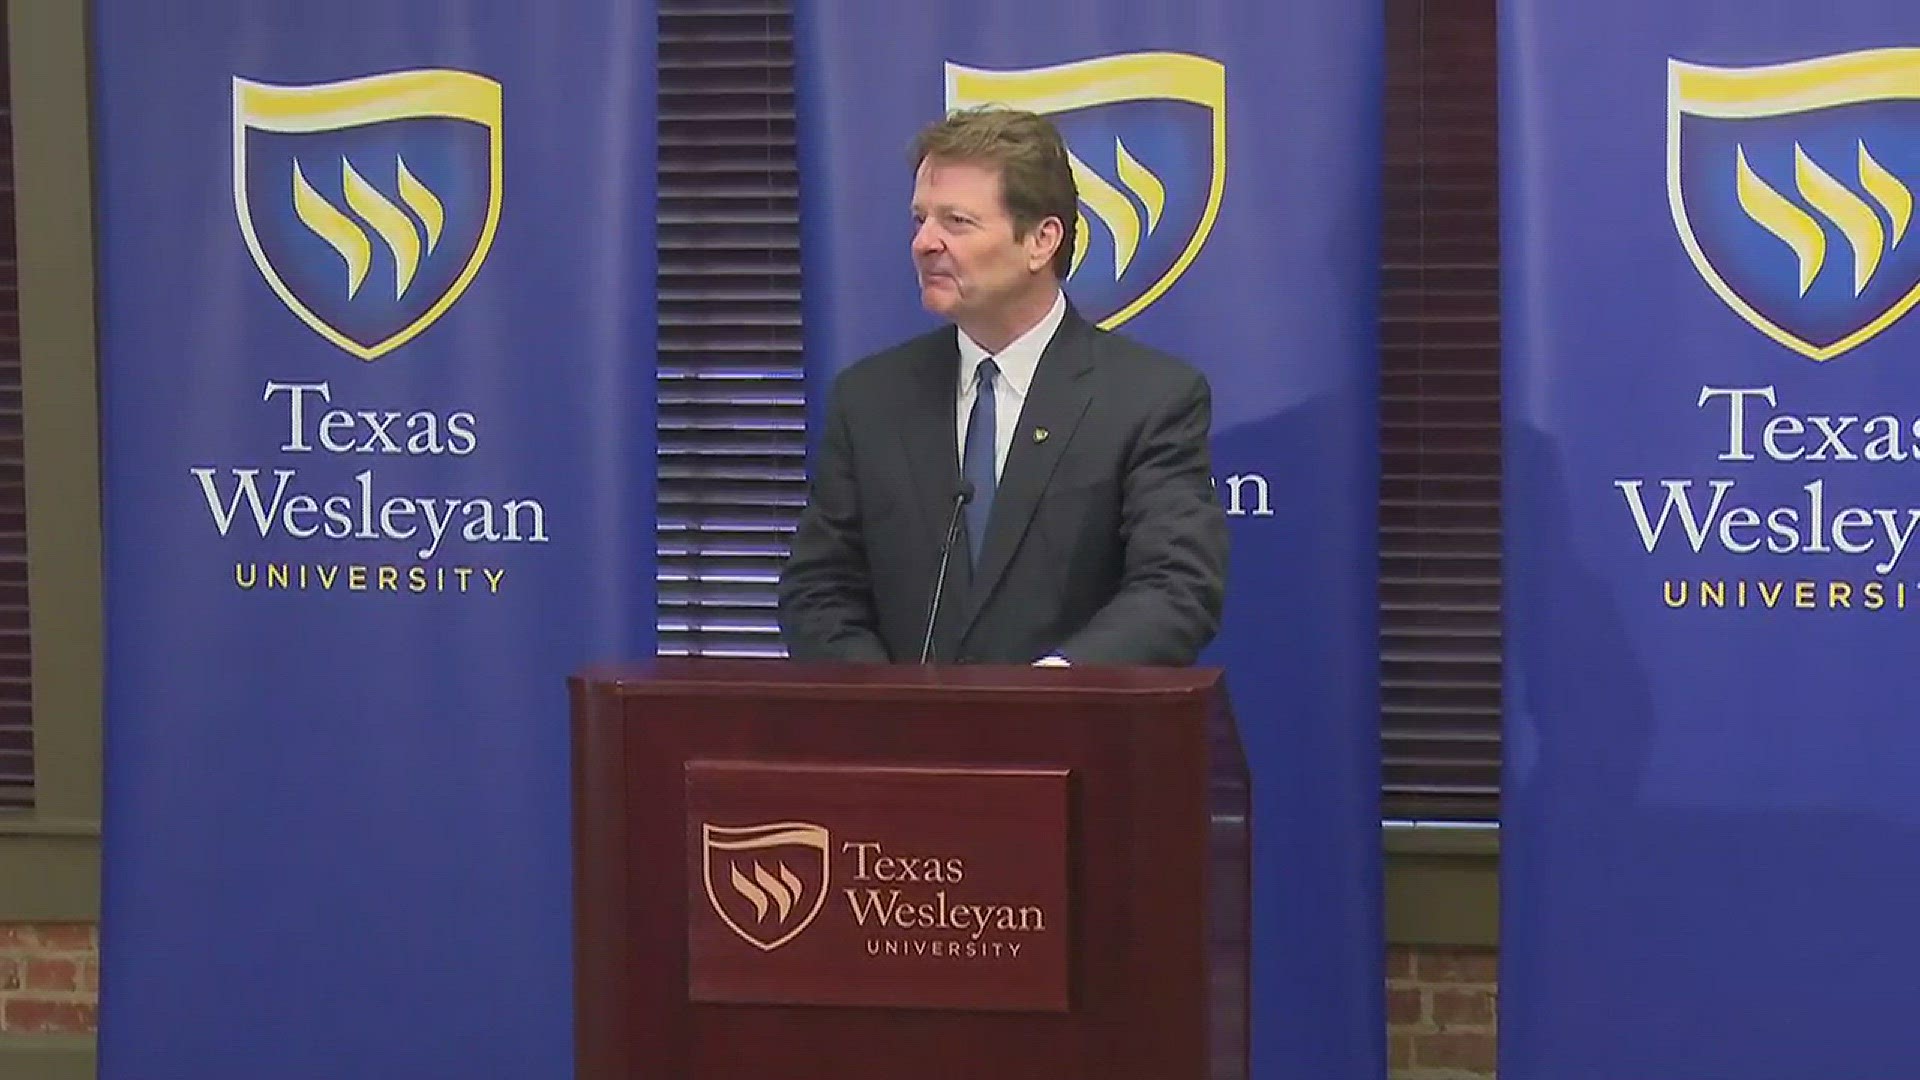 Texas Wesleyan University President Frederick Slabach announced the termination of Mike Jeffcoat Thursday morning. WFAA